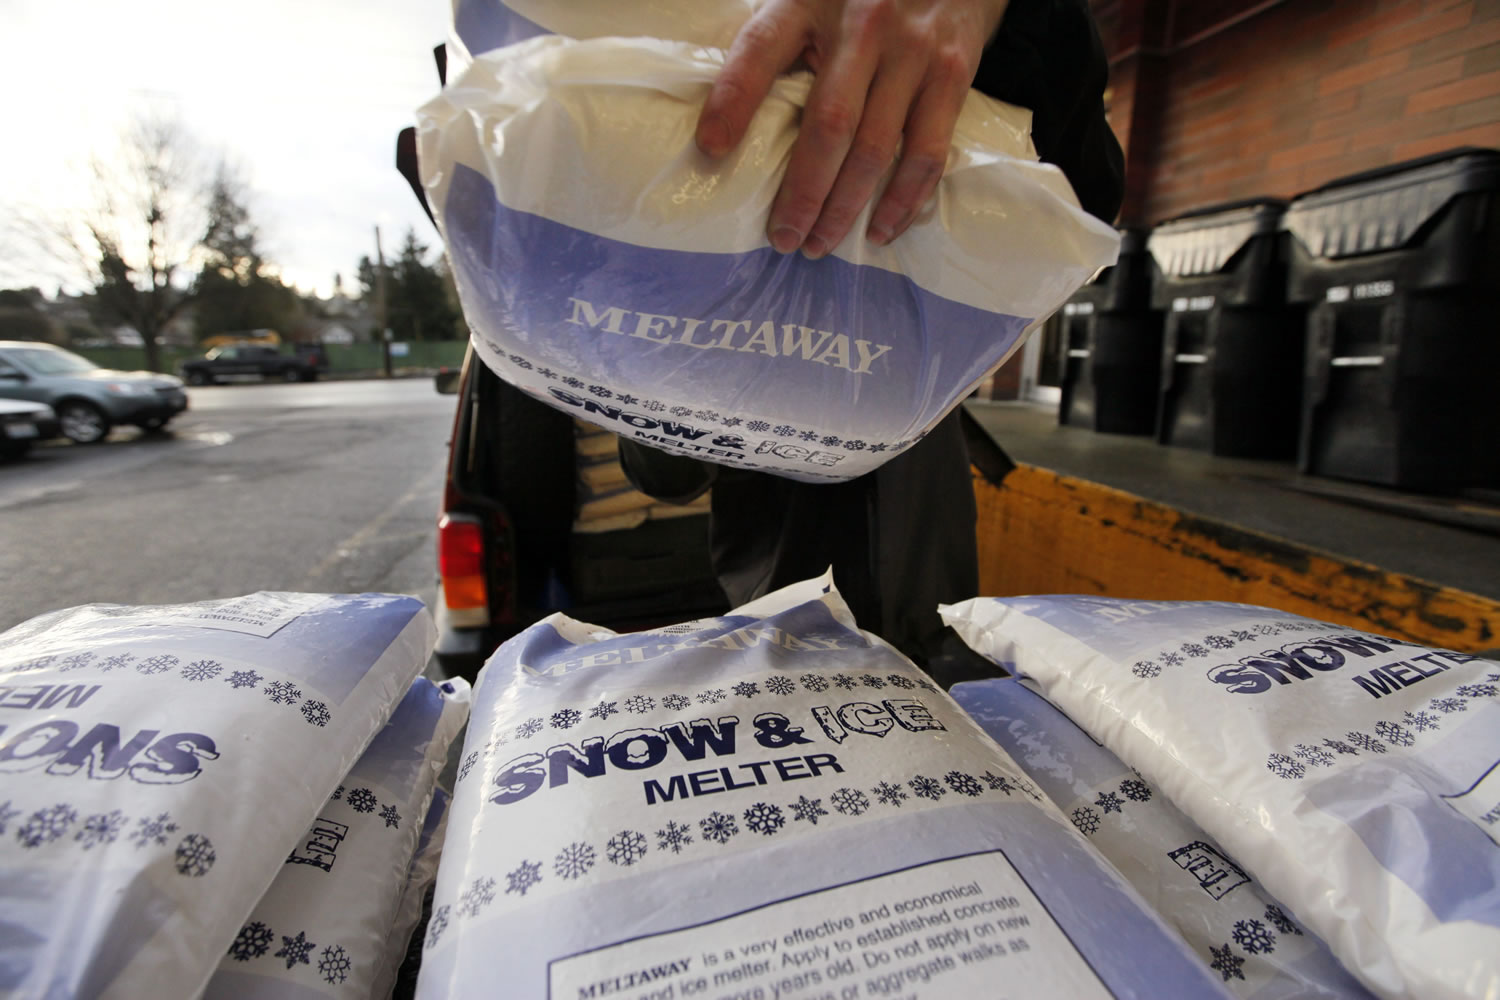 Clerk Joel Bartlett stacks bags of a de-icing product Tuesday at a Seattle hardware store, after making a run to the warehouse when supplies ran out.